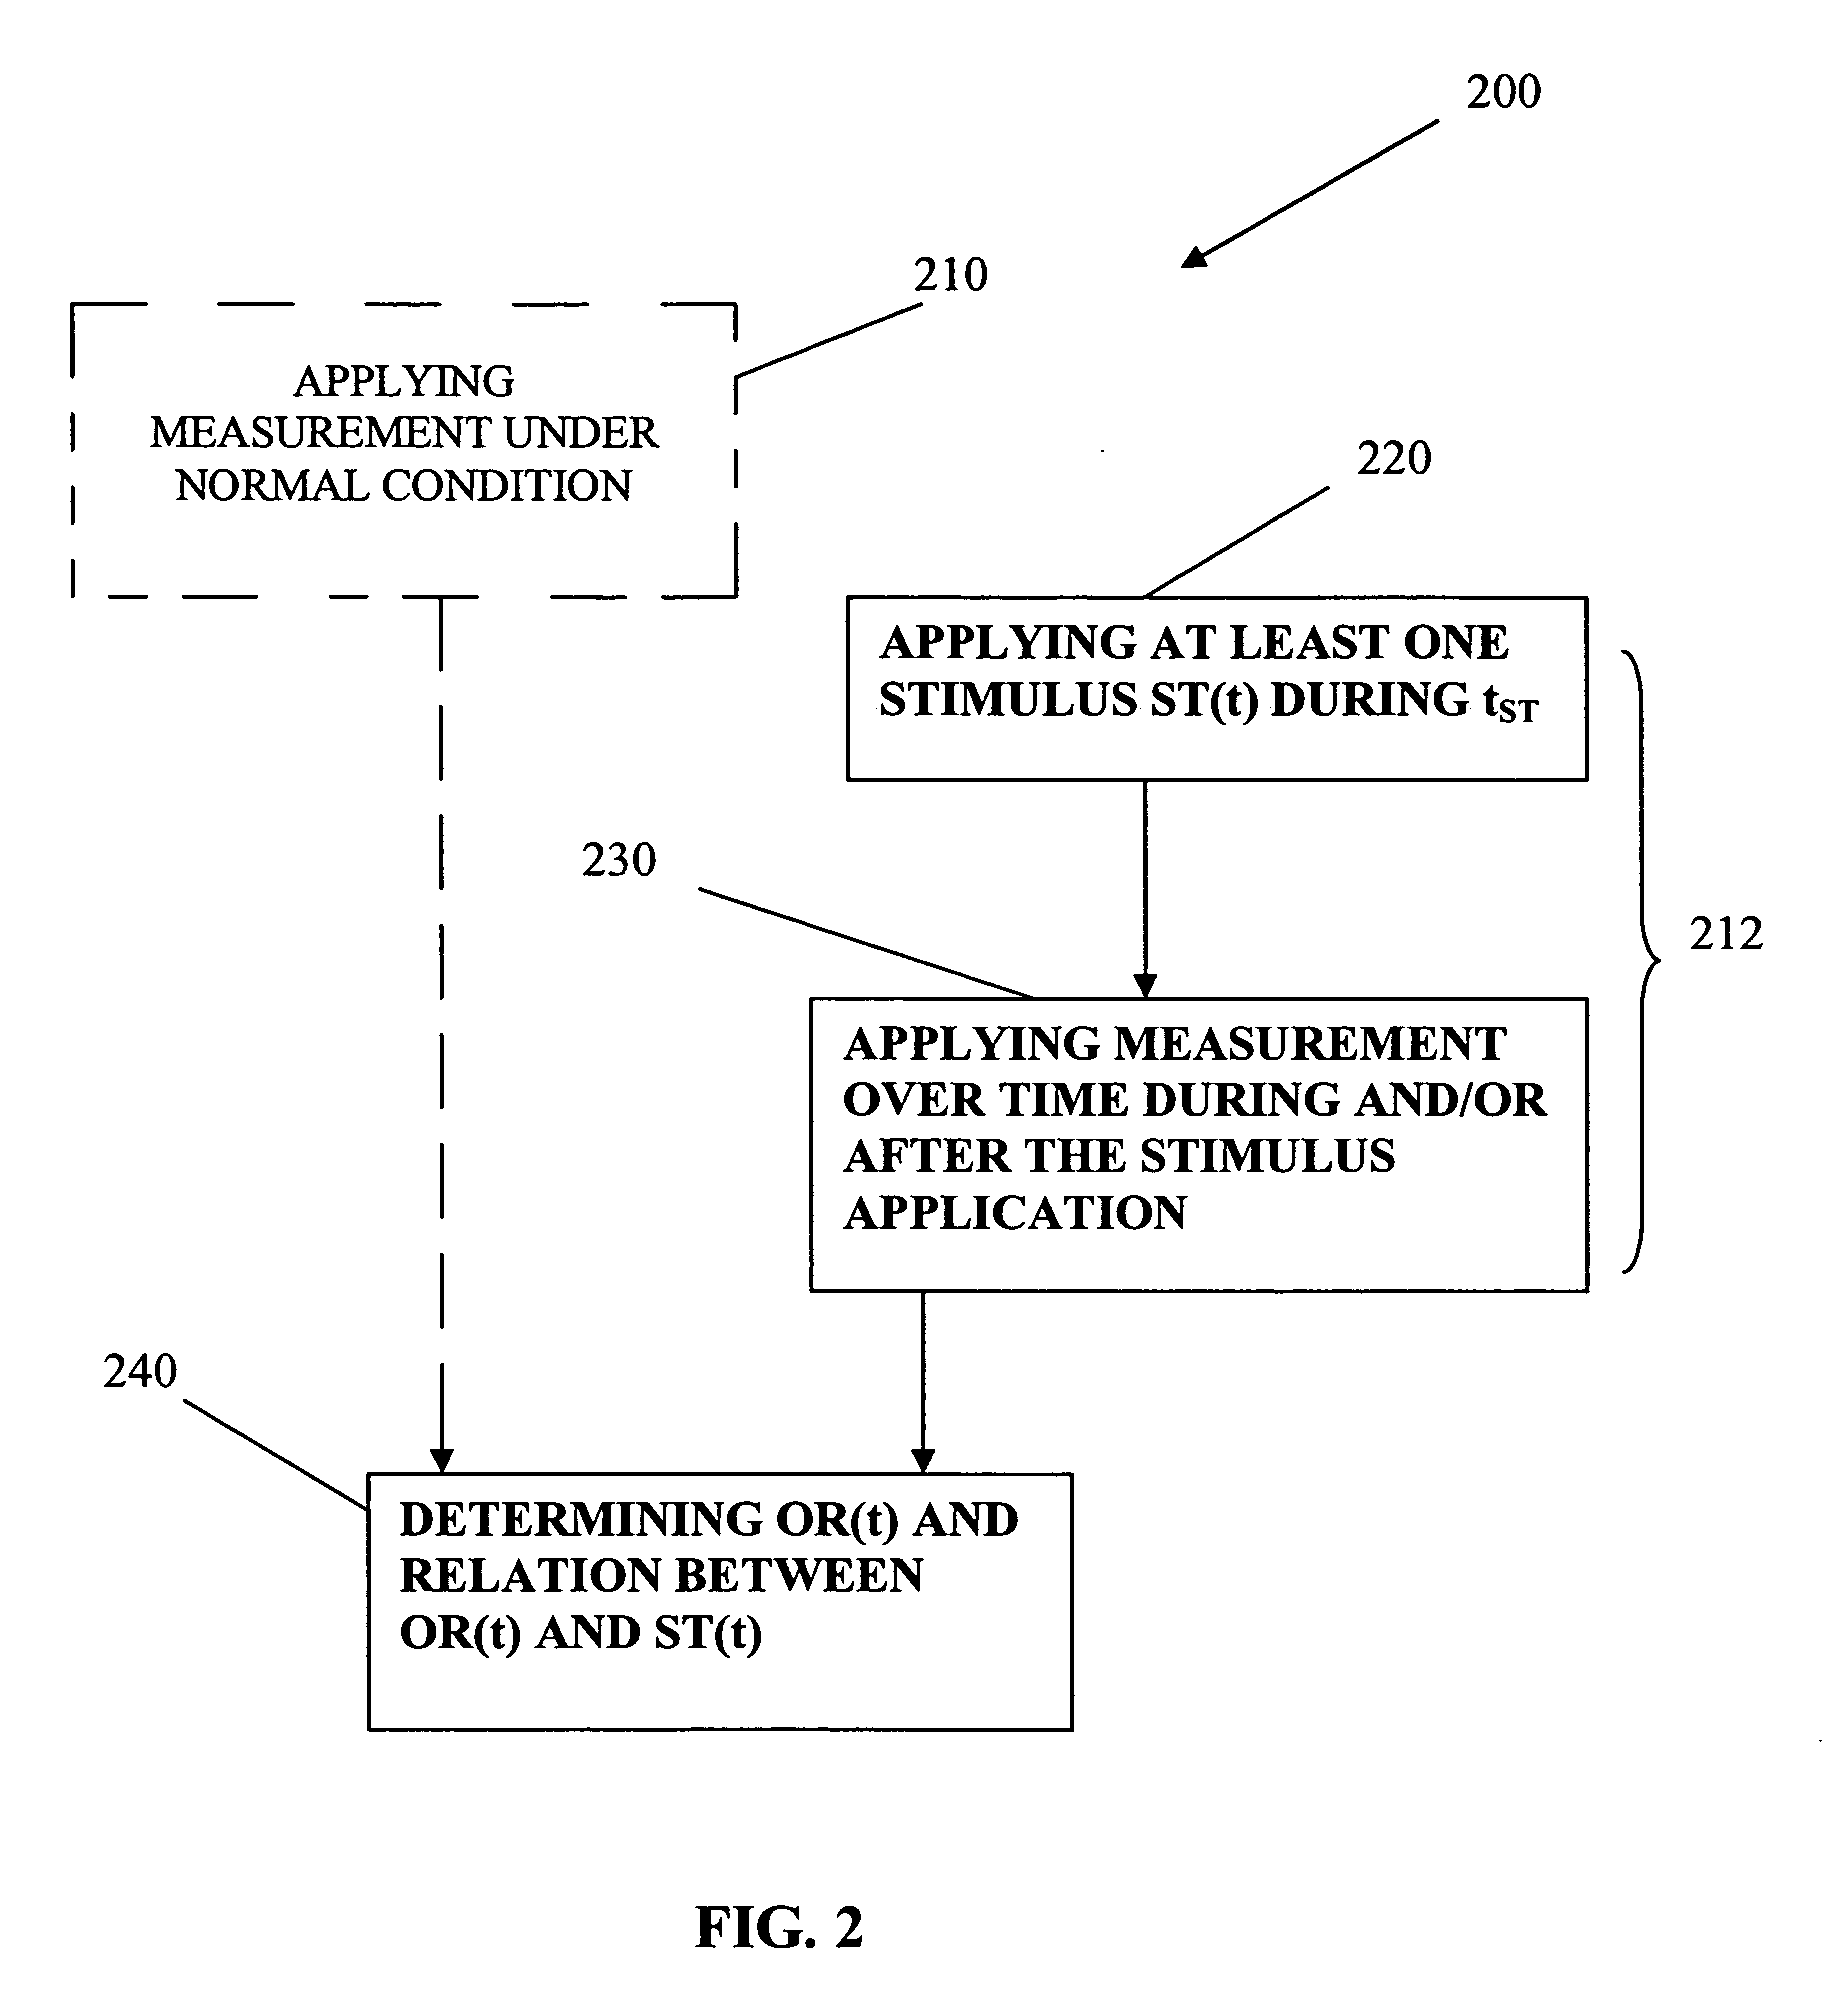 Methods and apparatus for non-invasive determination of patient's blood conditions